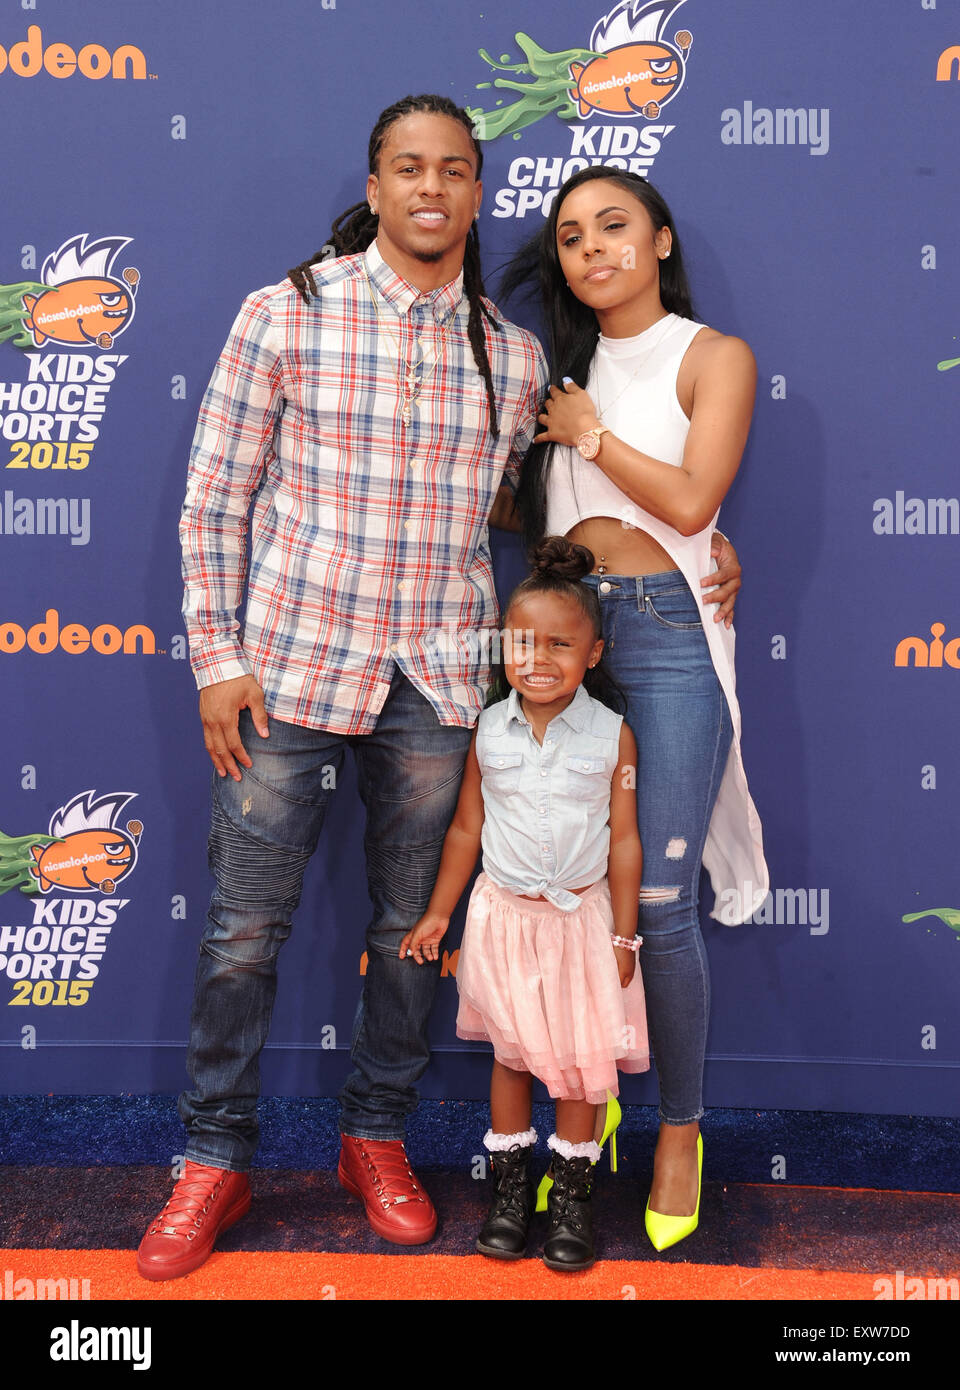 Los Angeles, California, USA. 16th July, 2015. Jason Verrett attending the Nickelodeon Kids Choice Sports Awards 2015 Red Carpet held at the UCLA's Pauley Pavilion in Westwood, California on July 16, 2015. 2015 Credit:  D. Long/Globe Photos/ZUMA Wire/Alamy Live News Stock Photo